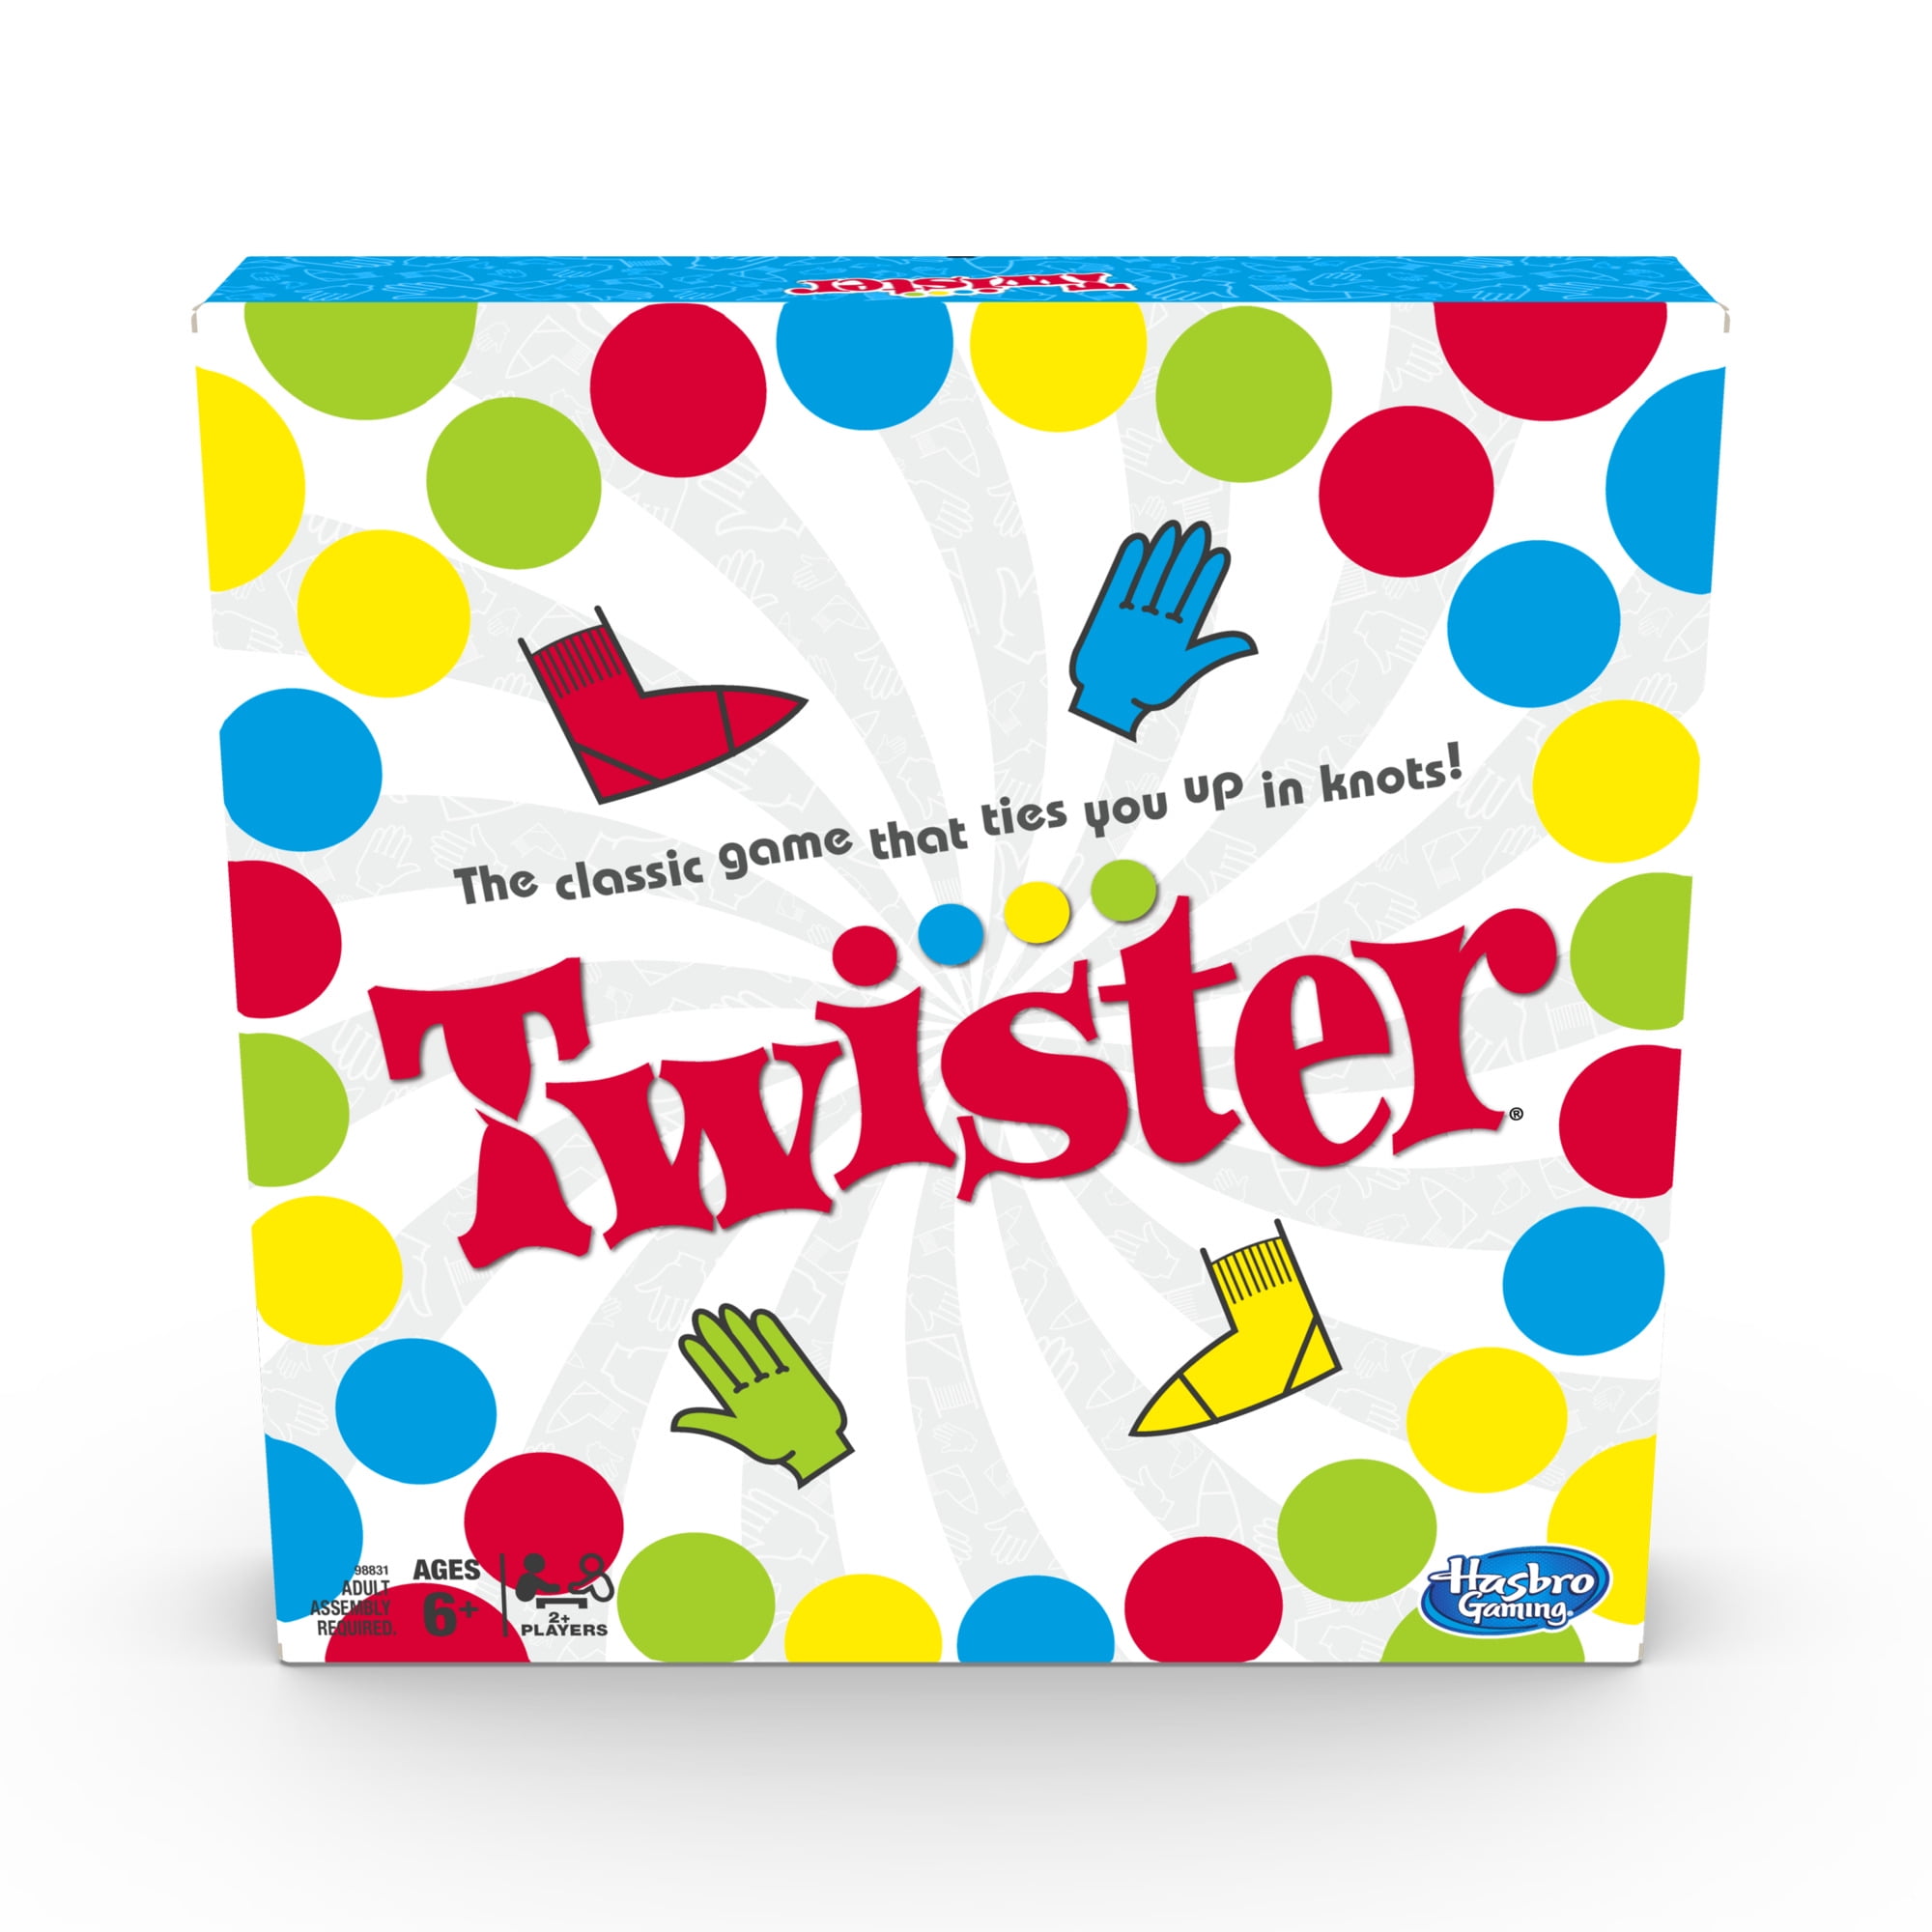 Twister Classic Game Family Fun Friends Party Game Xmas Gift 2 New Moves 